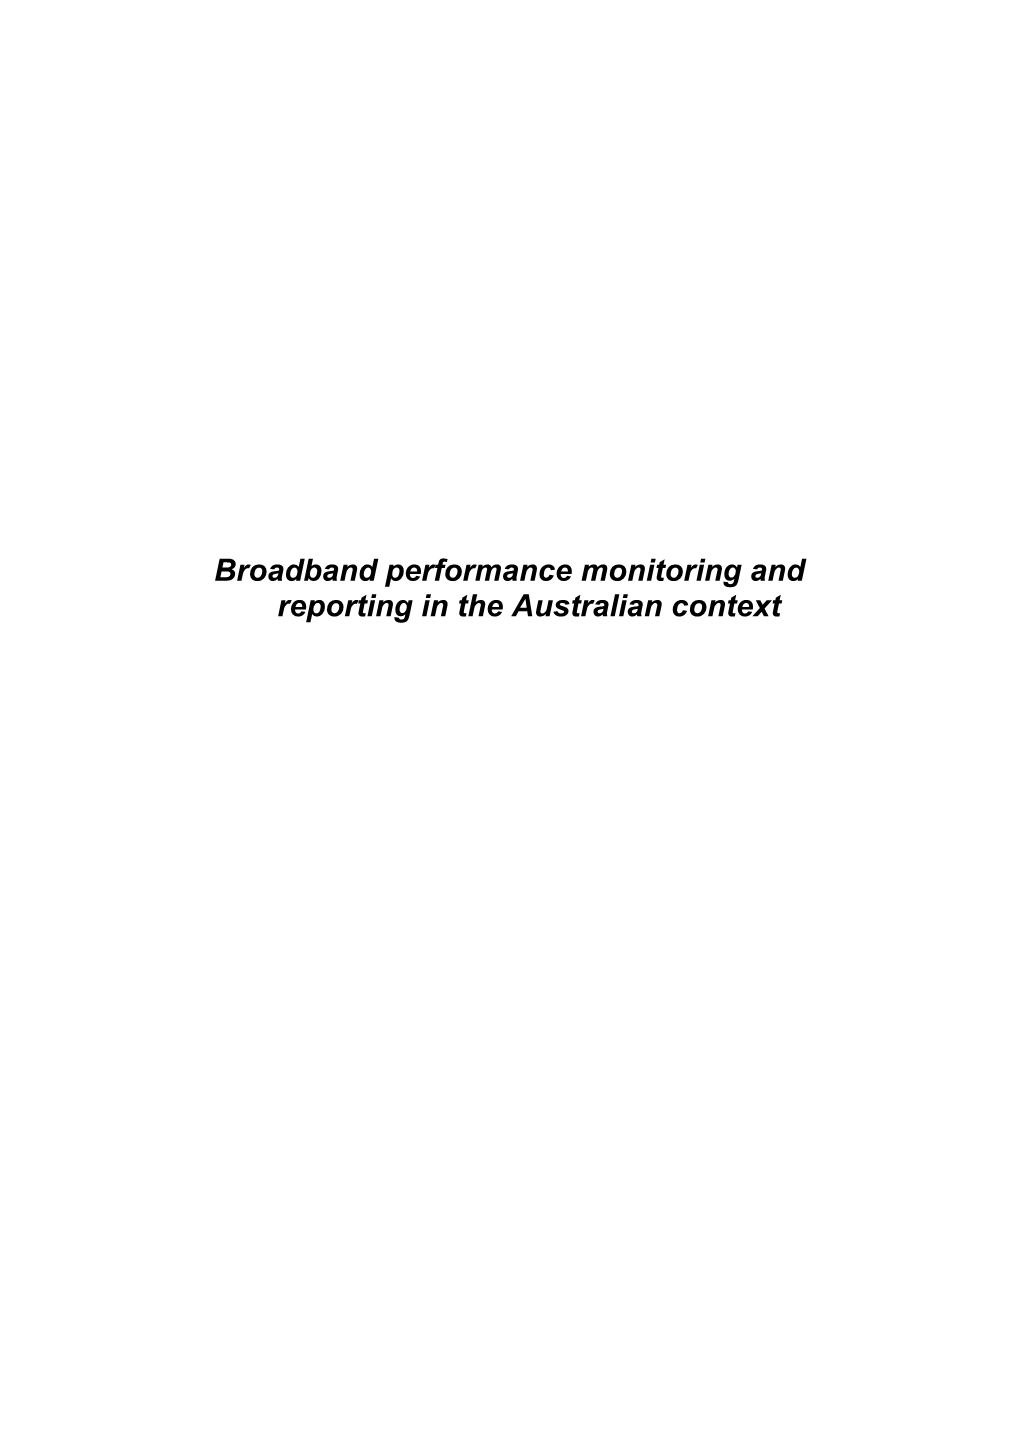 Broadband Performance Monitoring and Reporting in the Australian Context